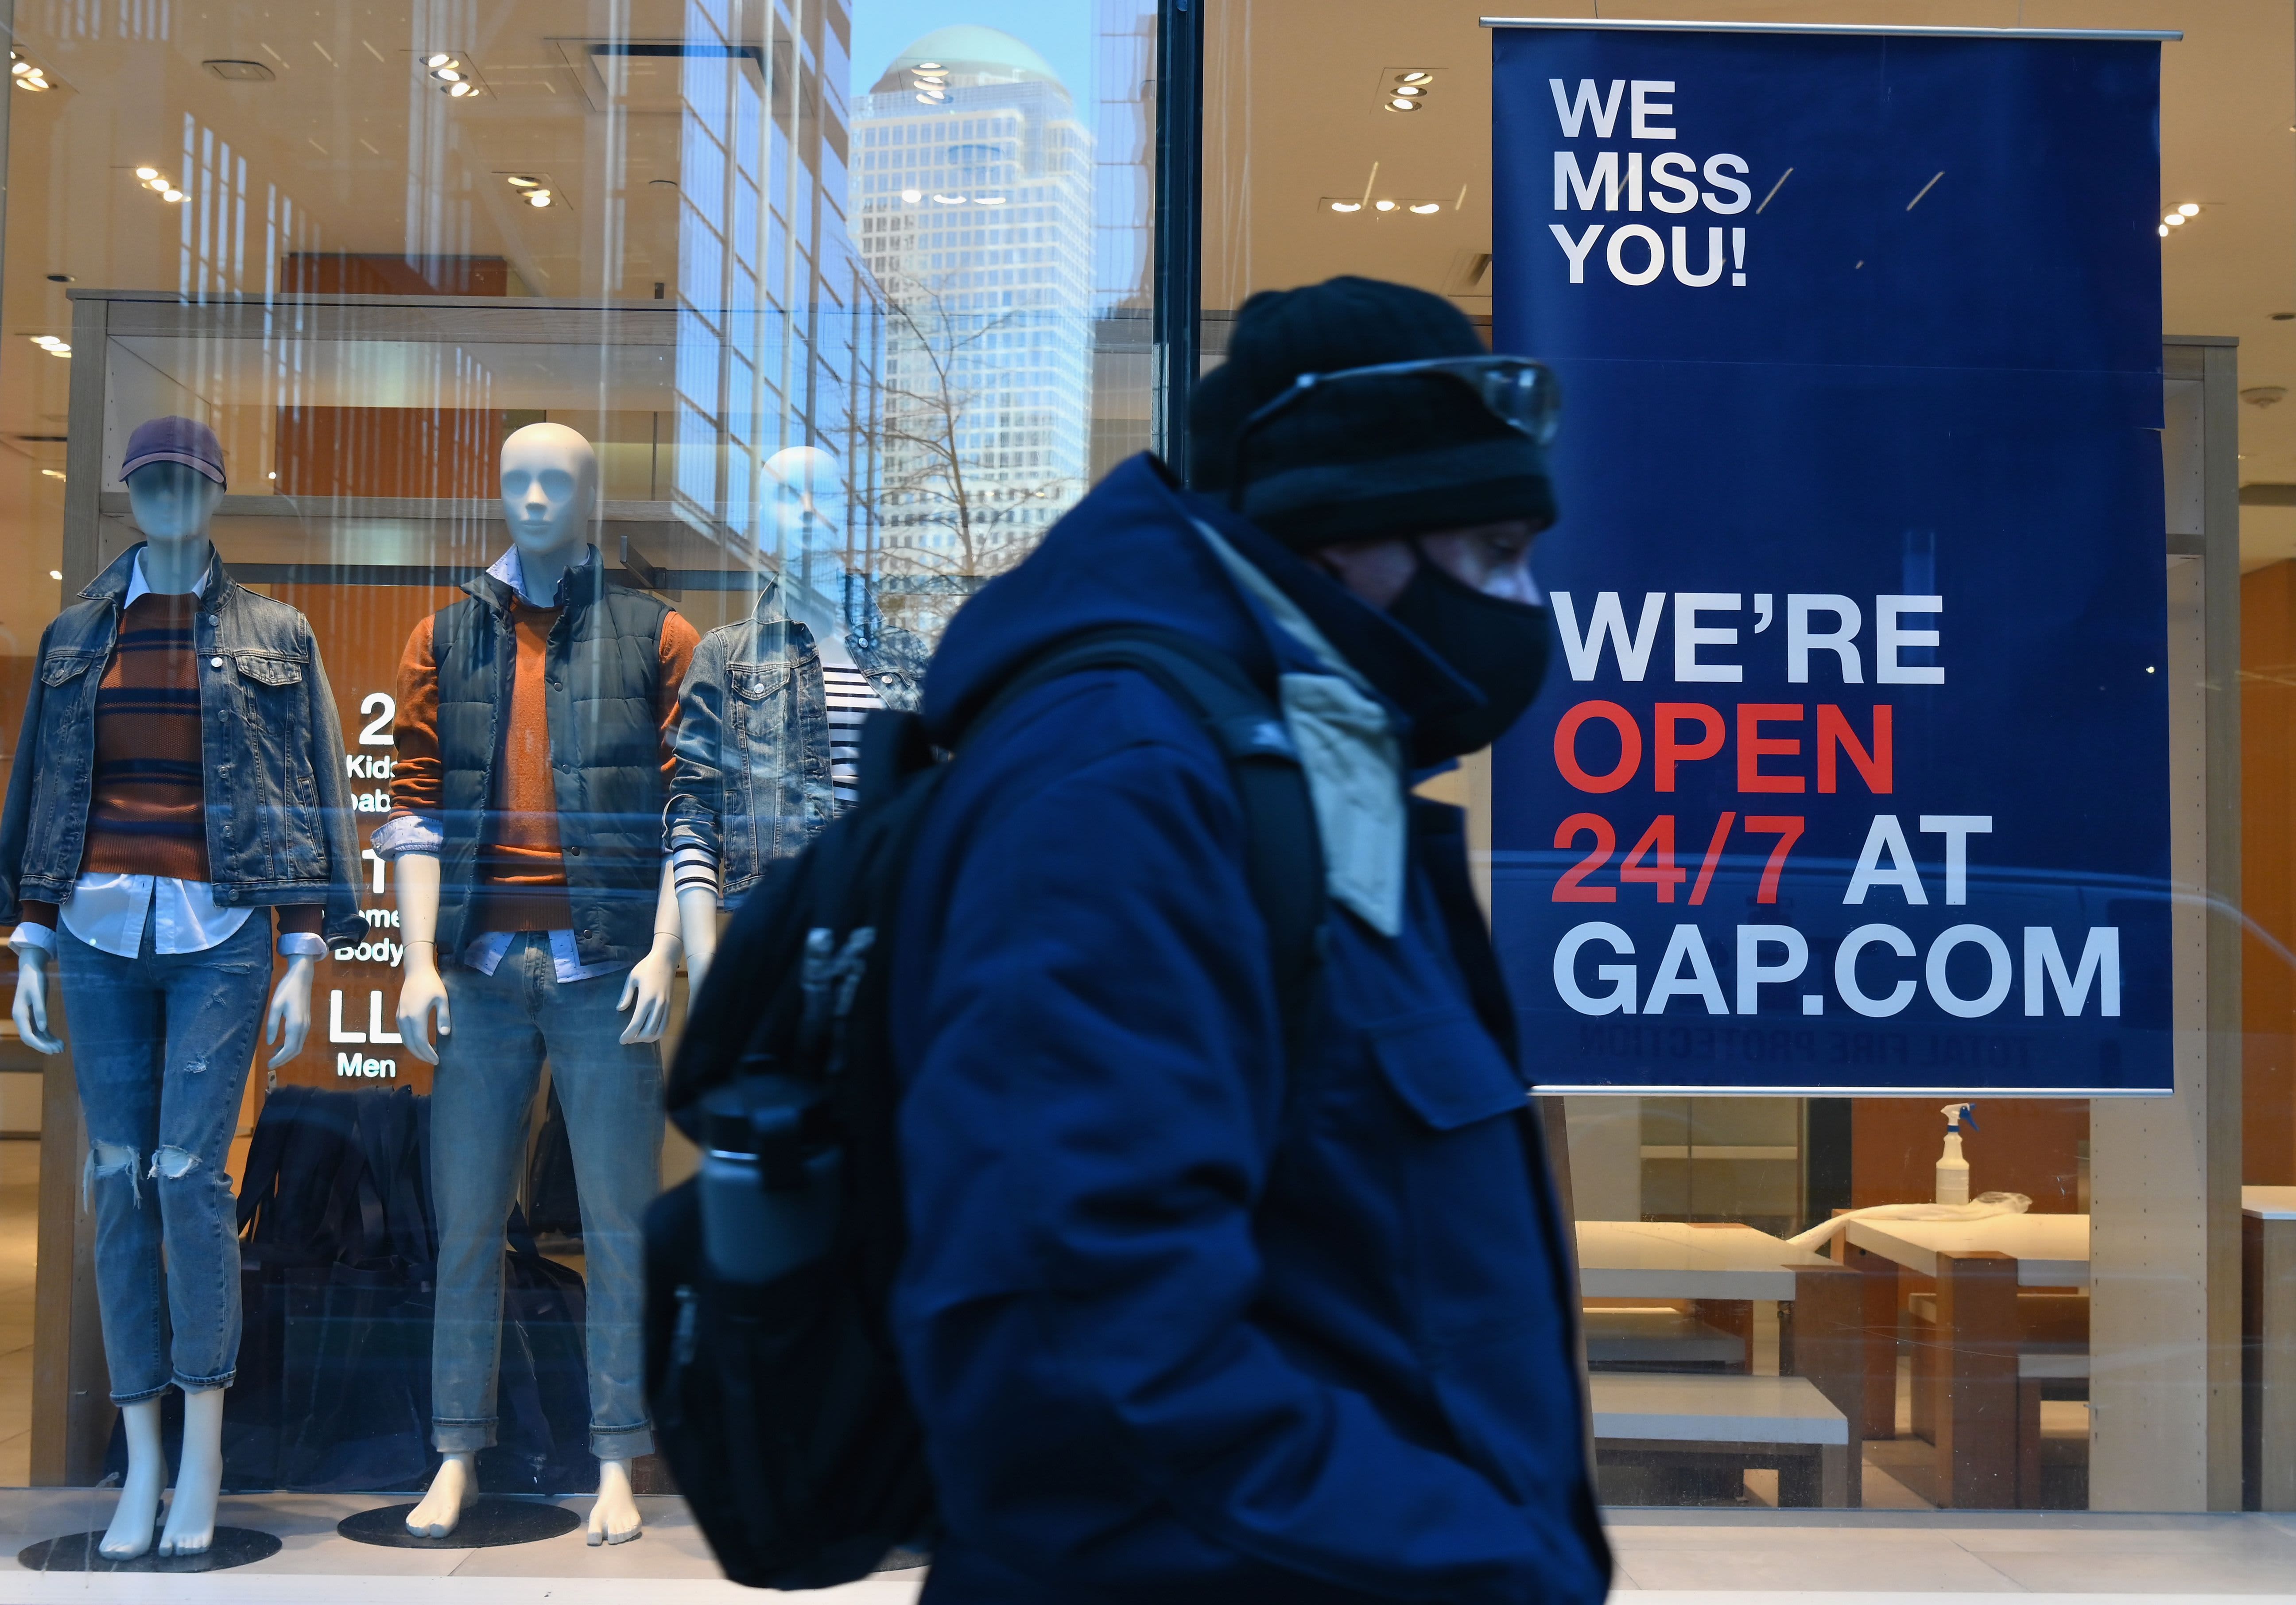 Gap (GPS) reports Q4 2020 revenue, sales outlook for 2021